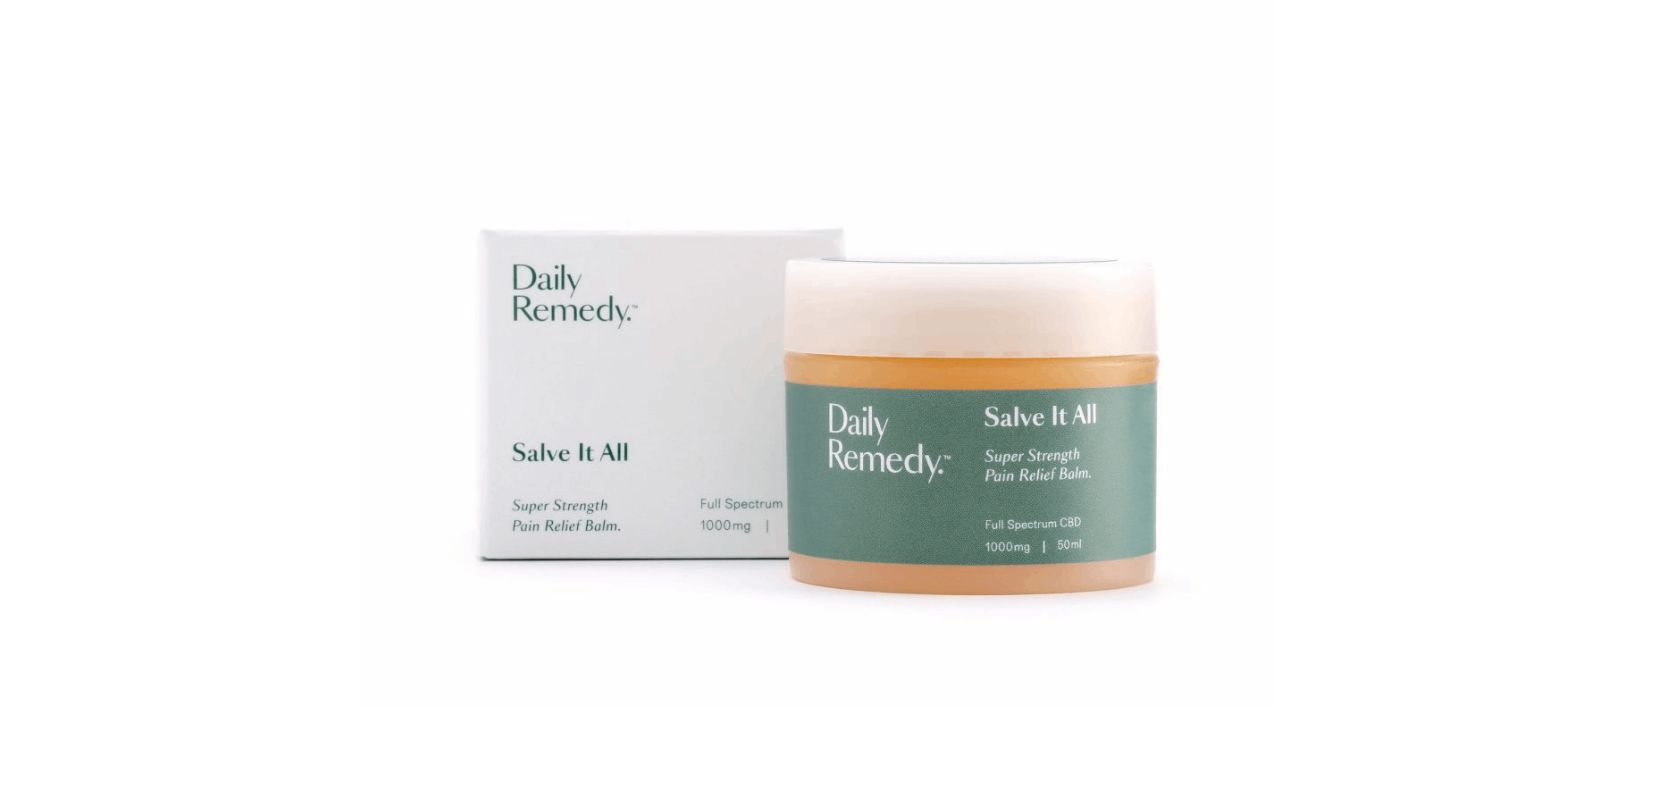 The Daily Remedy - Salve it All 1000mg CBD is a super strength pain relief balm that contains full spectrum CBD. 